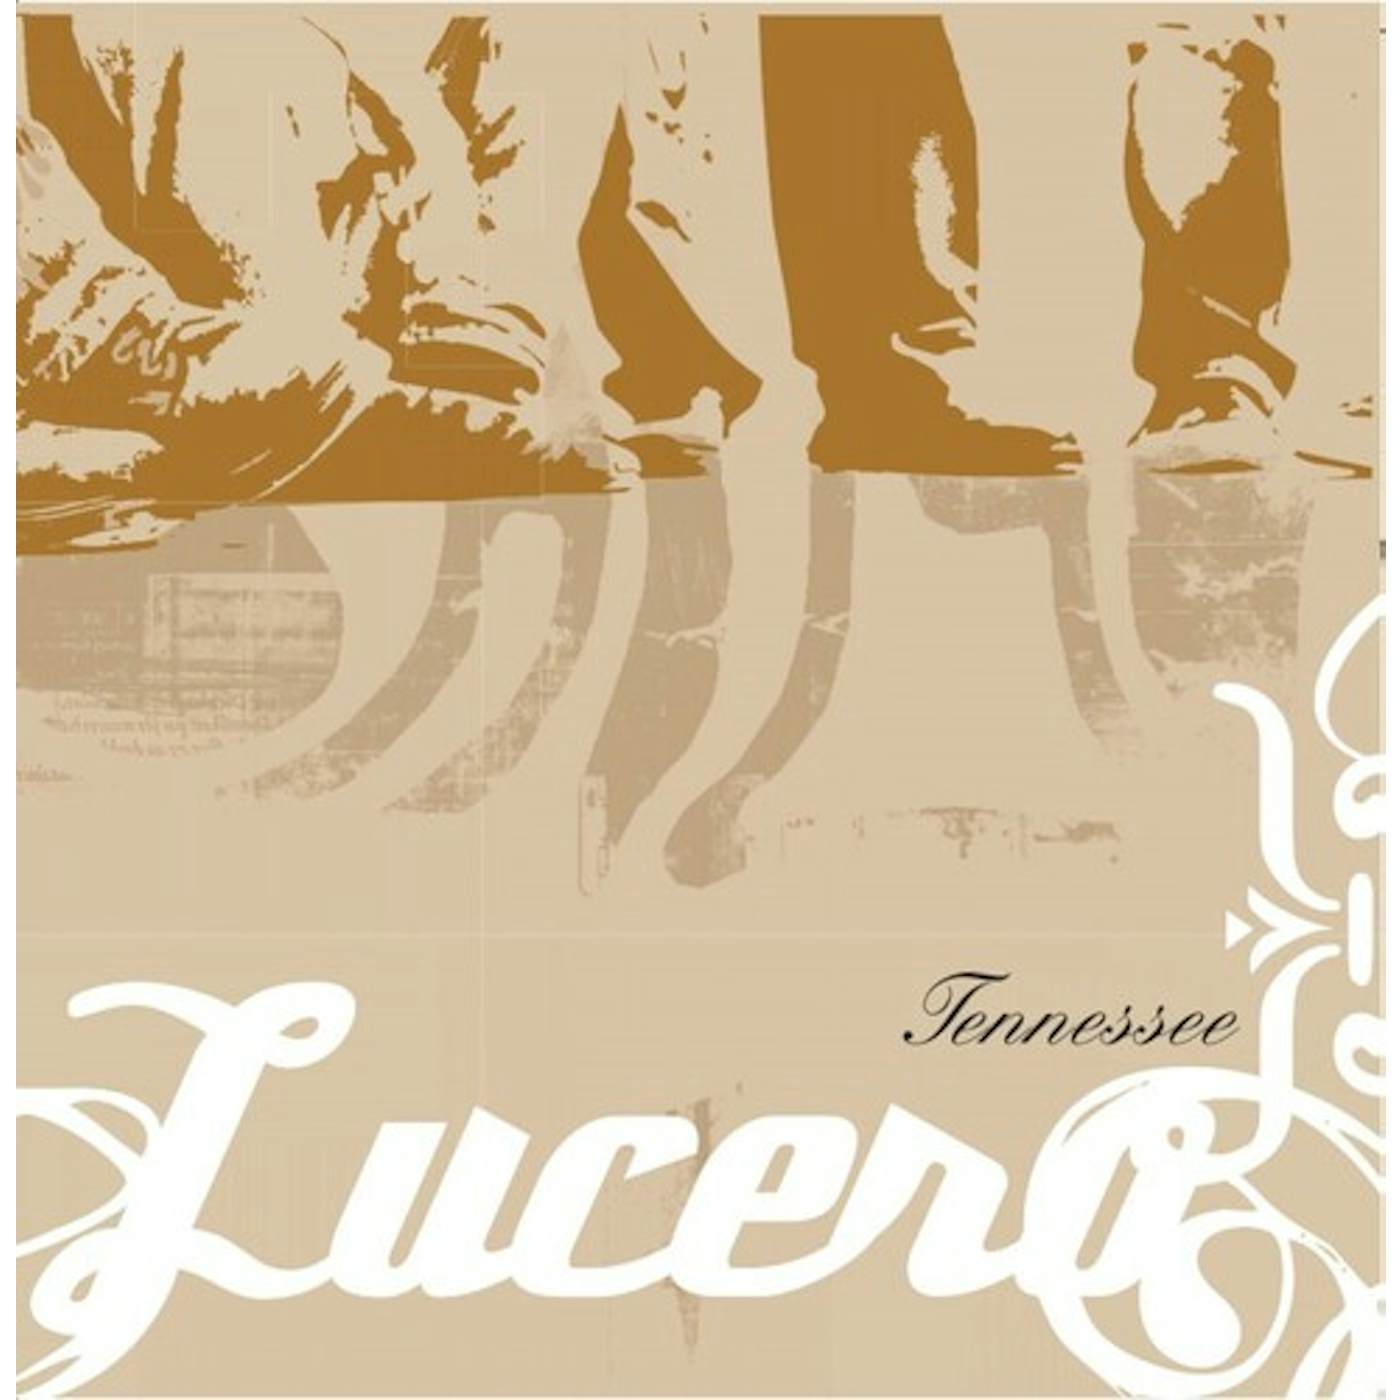 Lucero TENNESSEE: 20TH ANNIVERSARY EDITION - CLEAR Vinyl Record